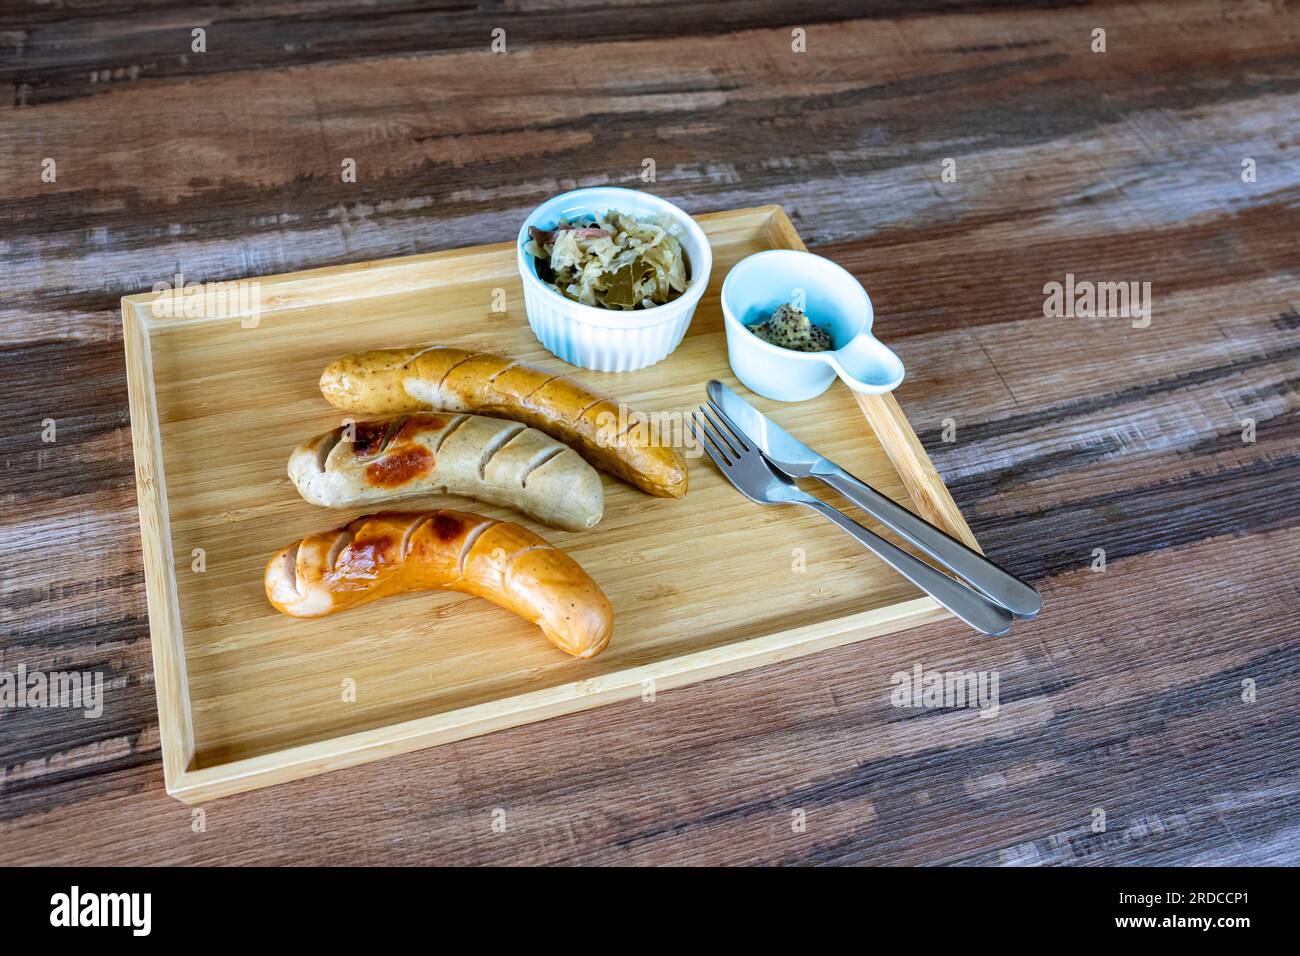 Photos of Grilled German Sausages with sauerkraut and dijon mustard in a small bowl with knife and fork Together in a rectangular wooden tray, on a wo Stock Photo